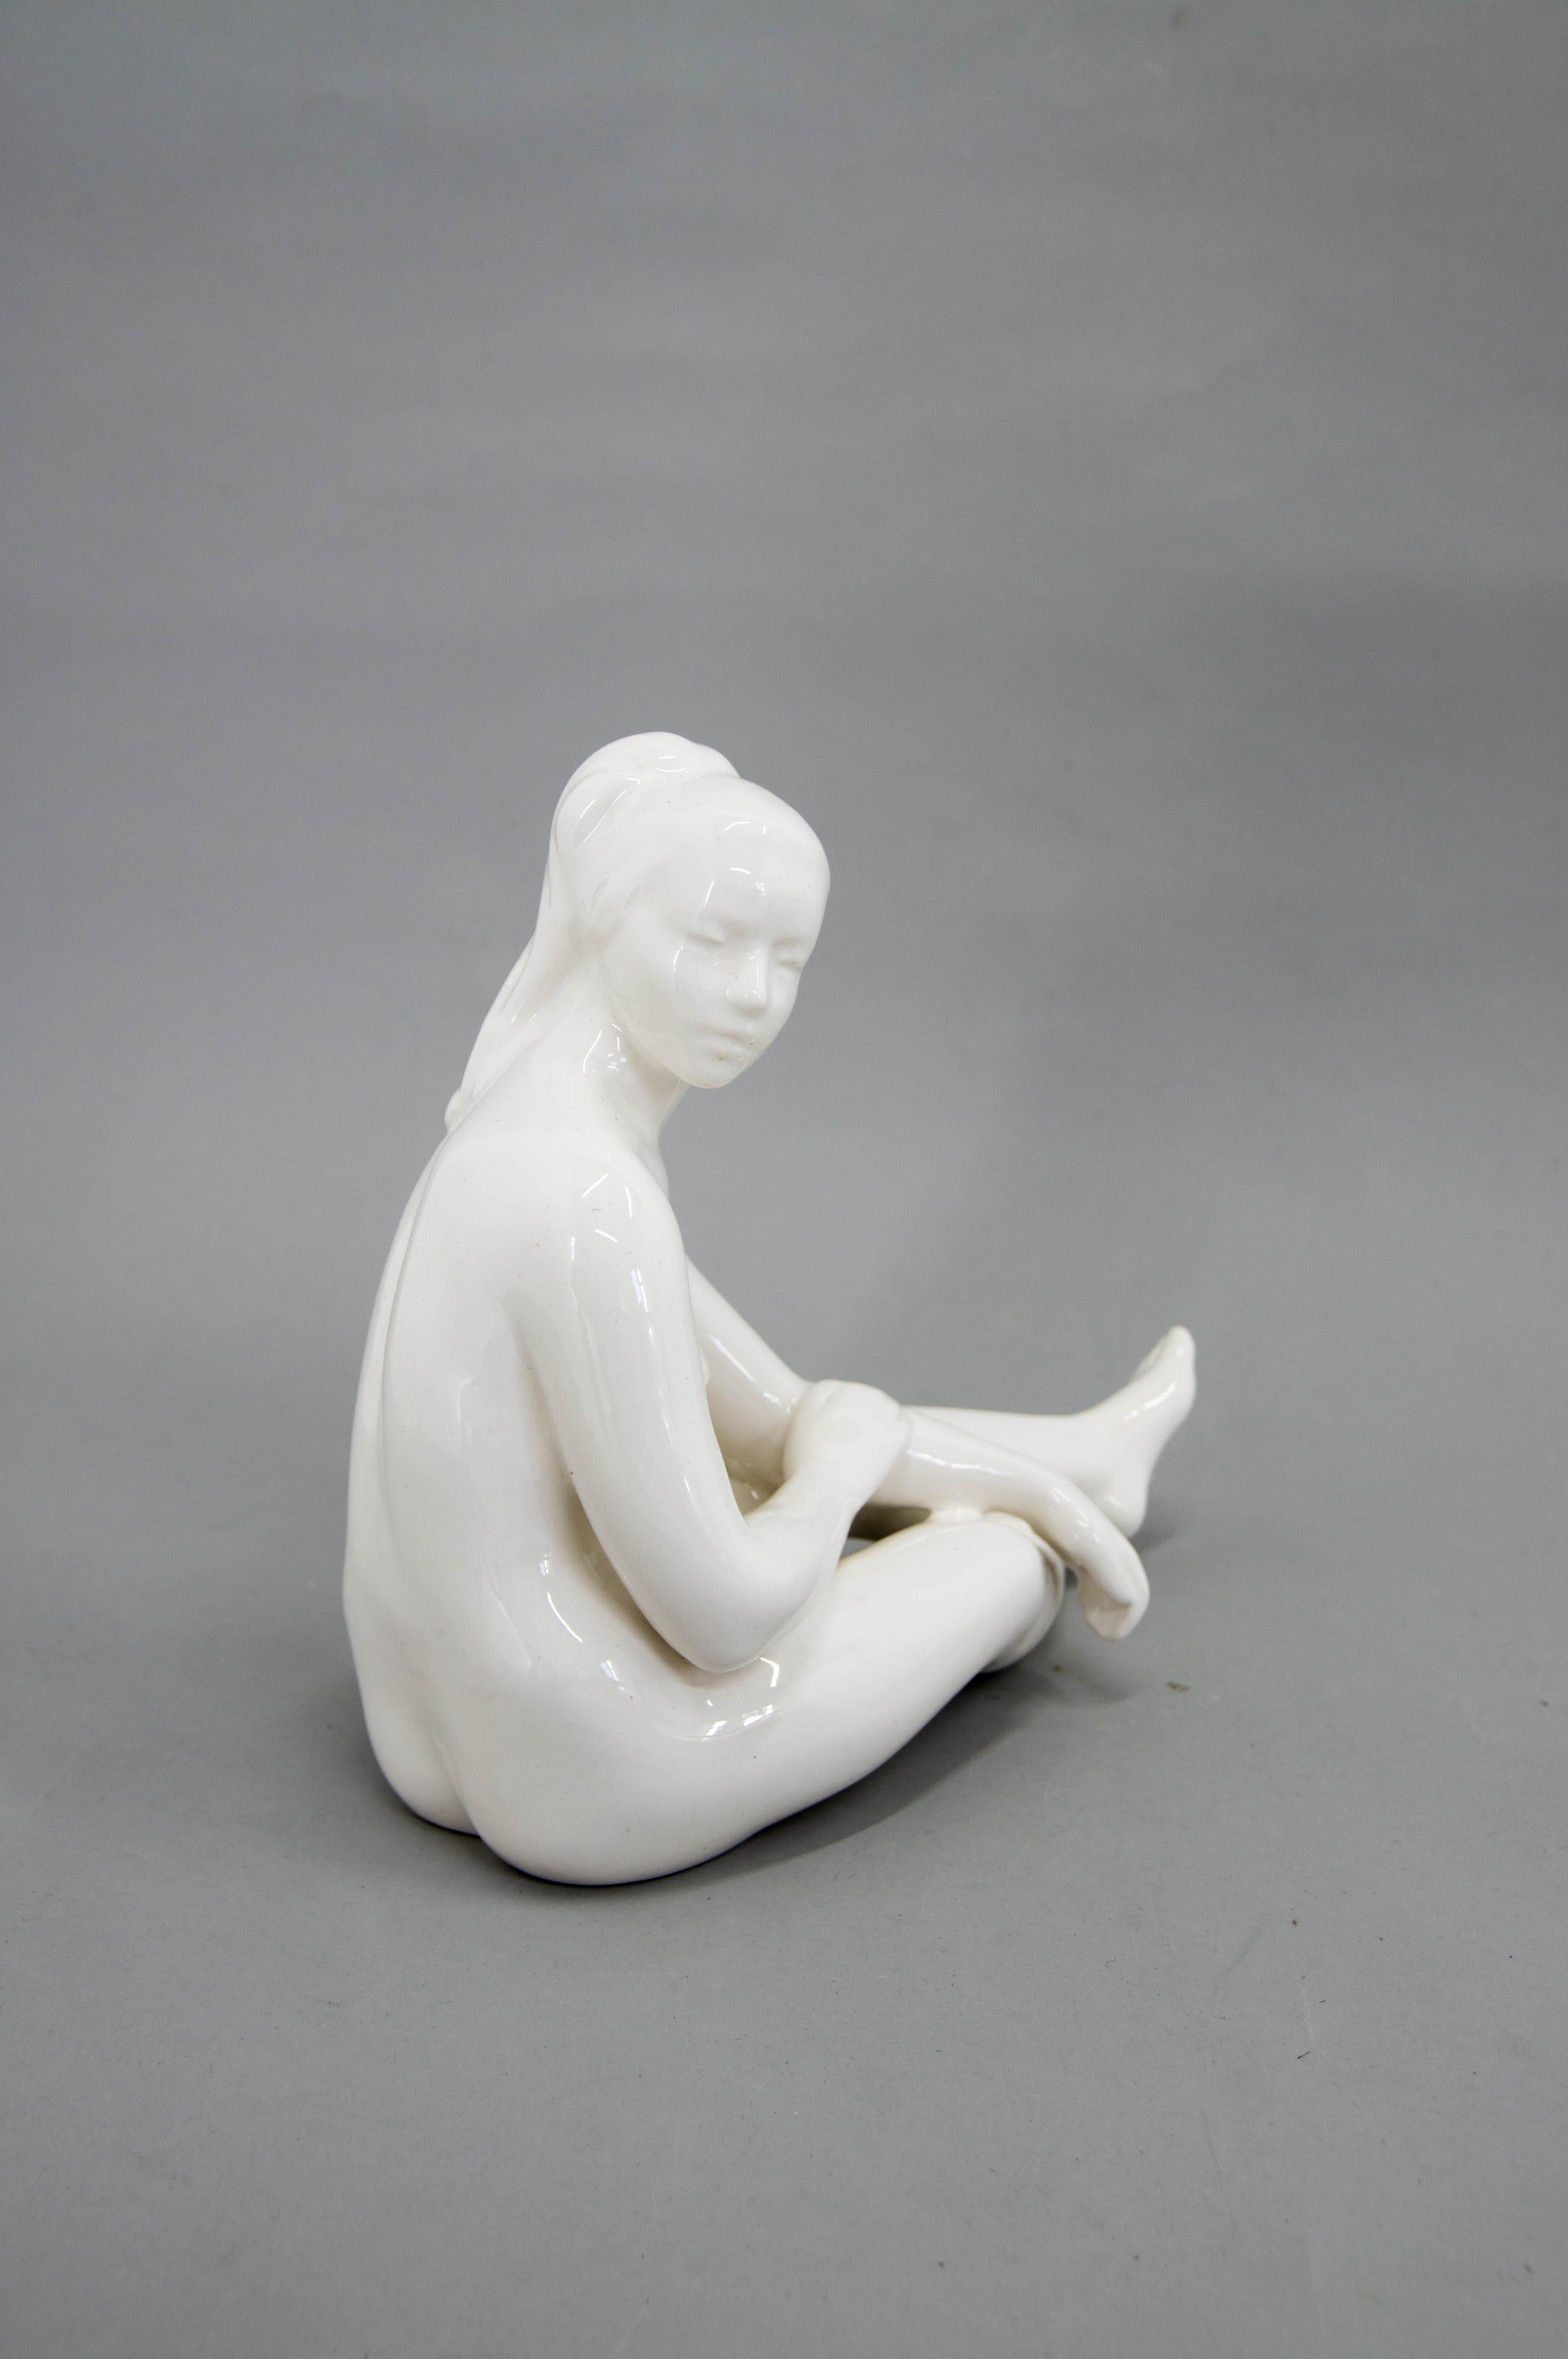 Glazed Mid-Century Sculpture Attributed to Bohumil Kokrda, 1960s For Sale